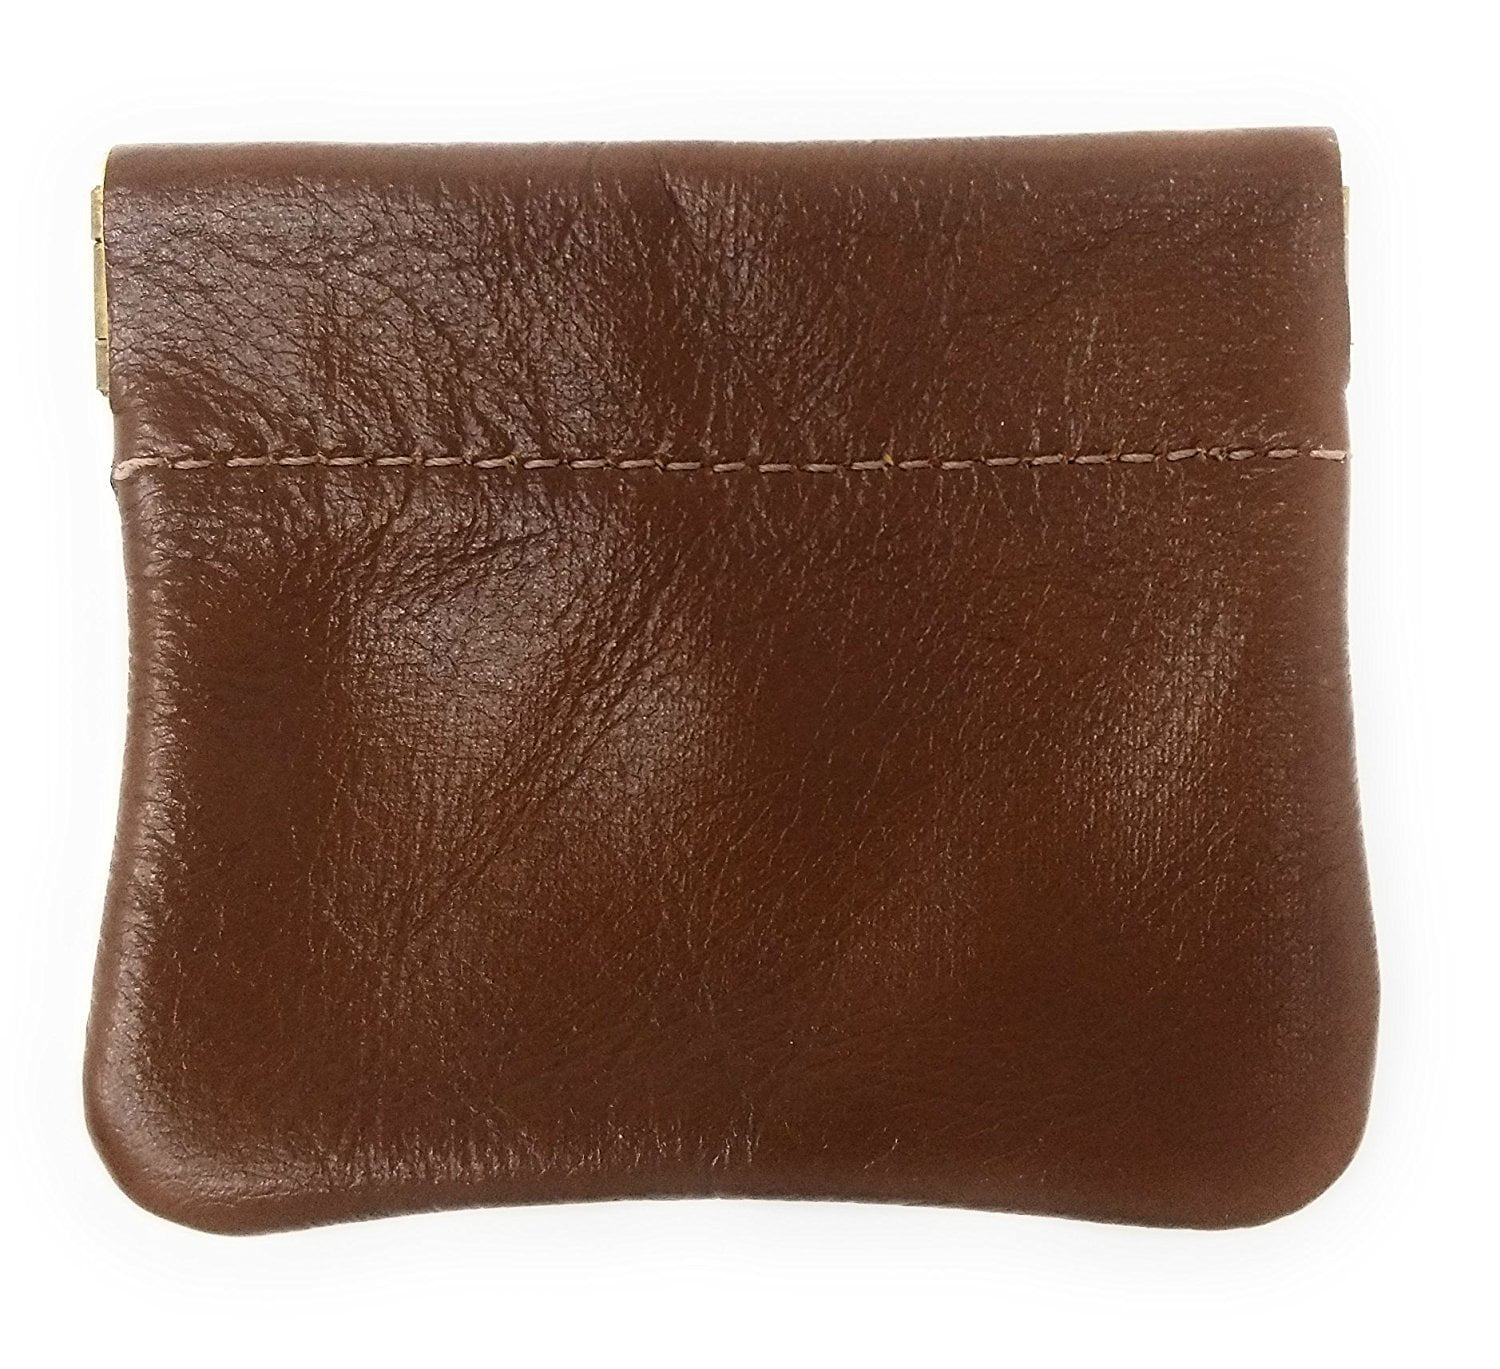 Leather Squeeze Coin Purse, Coin Pouch change Holder For Men, Pouch size 3.5 in X 3.25 in. high ...